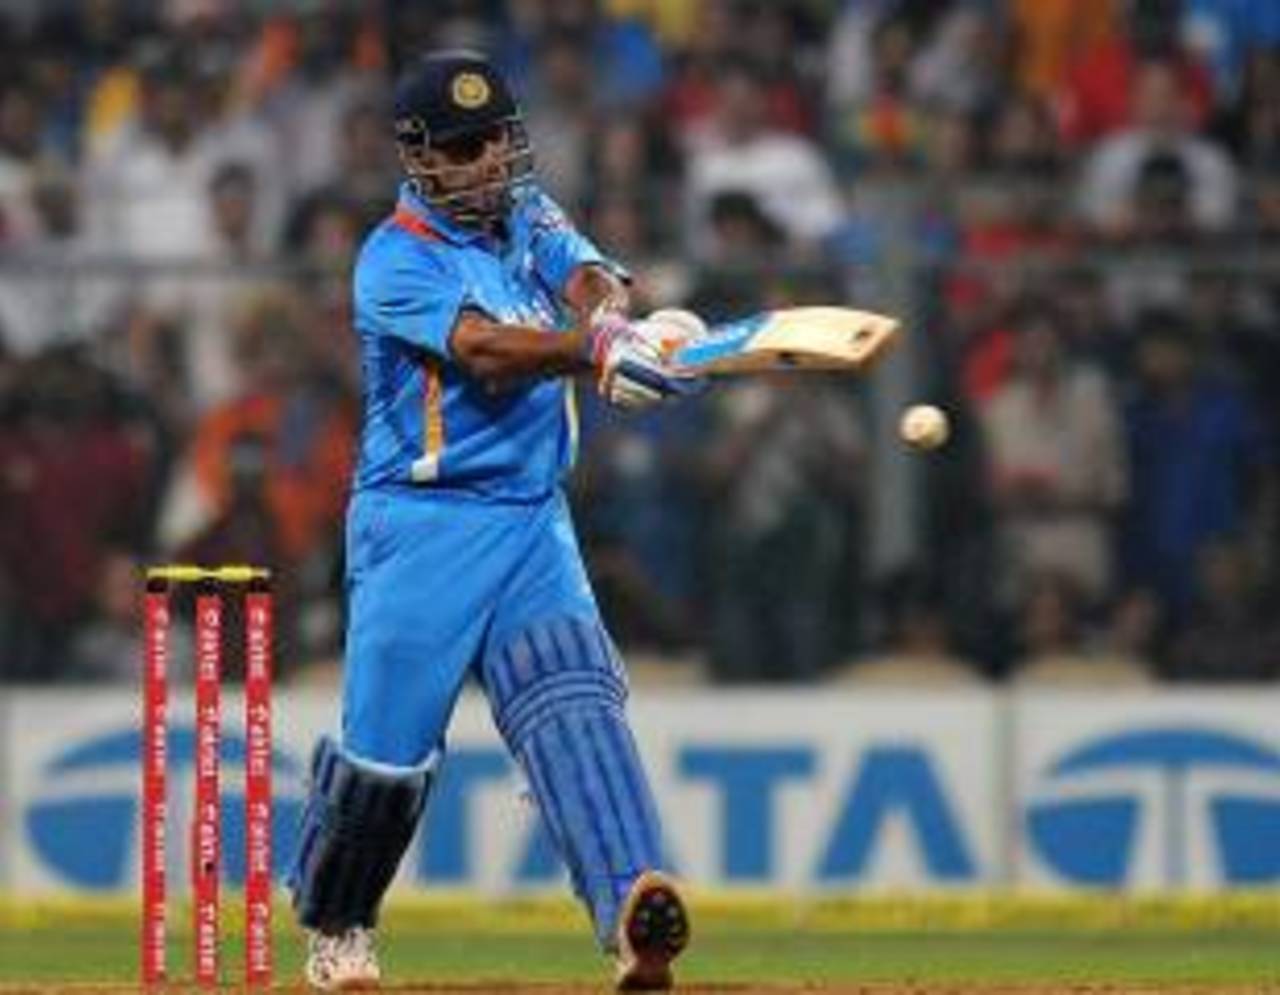 Sunil Gavaskar on MS Dhoni: "He needs time to reflect on his game and come back in a better way."&nbsp;&nbsp;&bull;&nbsp;&nbsp;BCCI